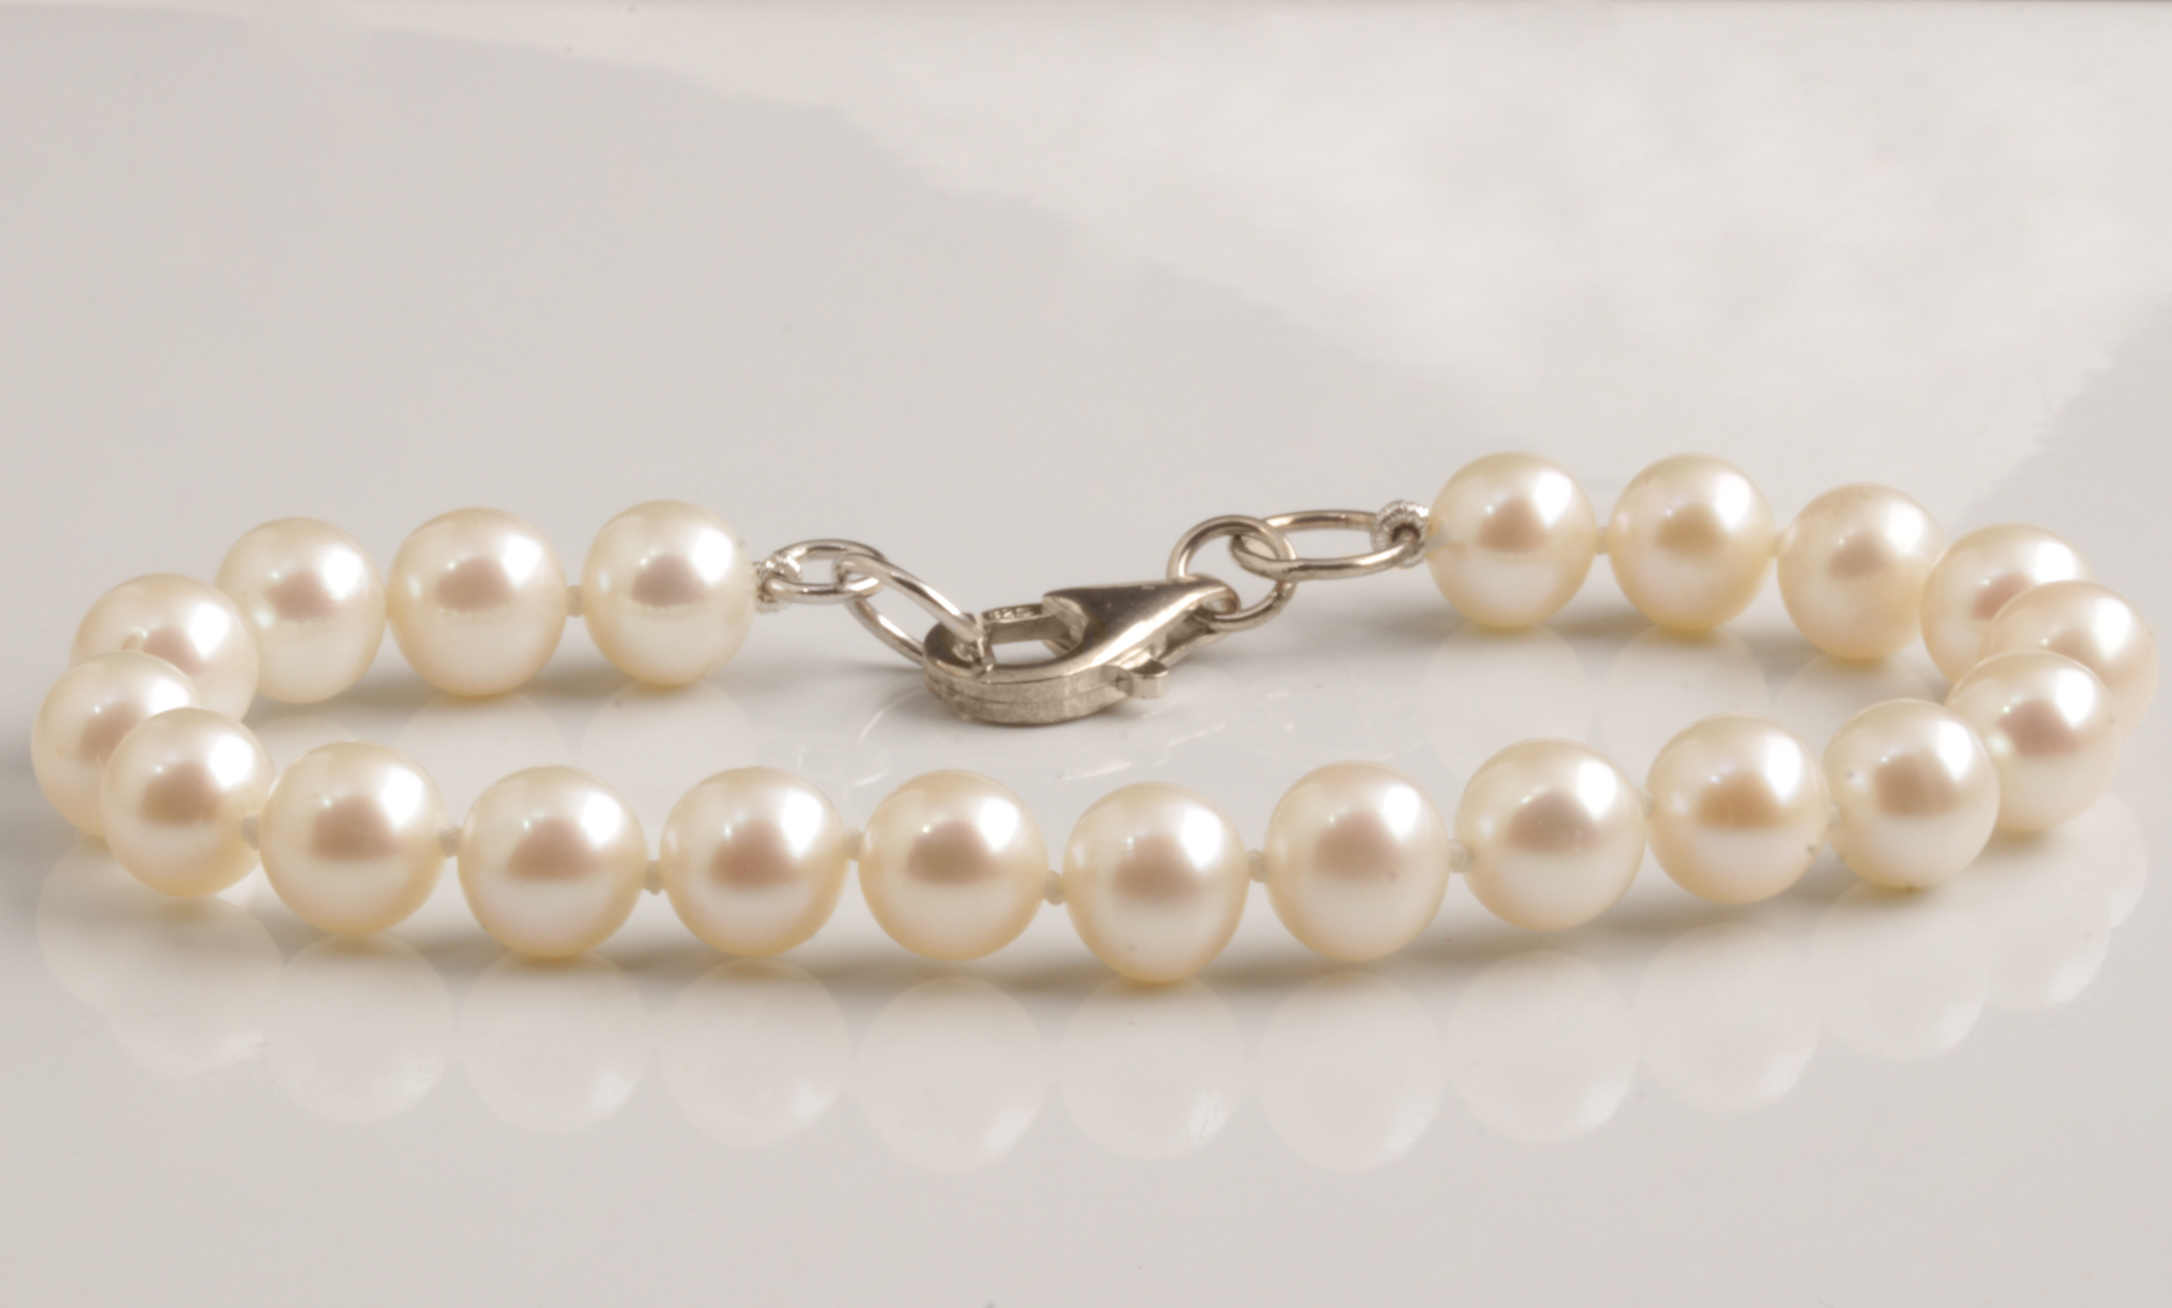 Fresh Water Pearl Bracelet & Necklace Set. 7" bracelet and 18" necklace, both w/ silver clasp. #12428